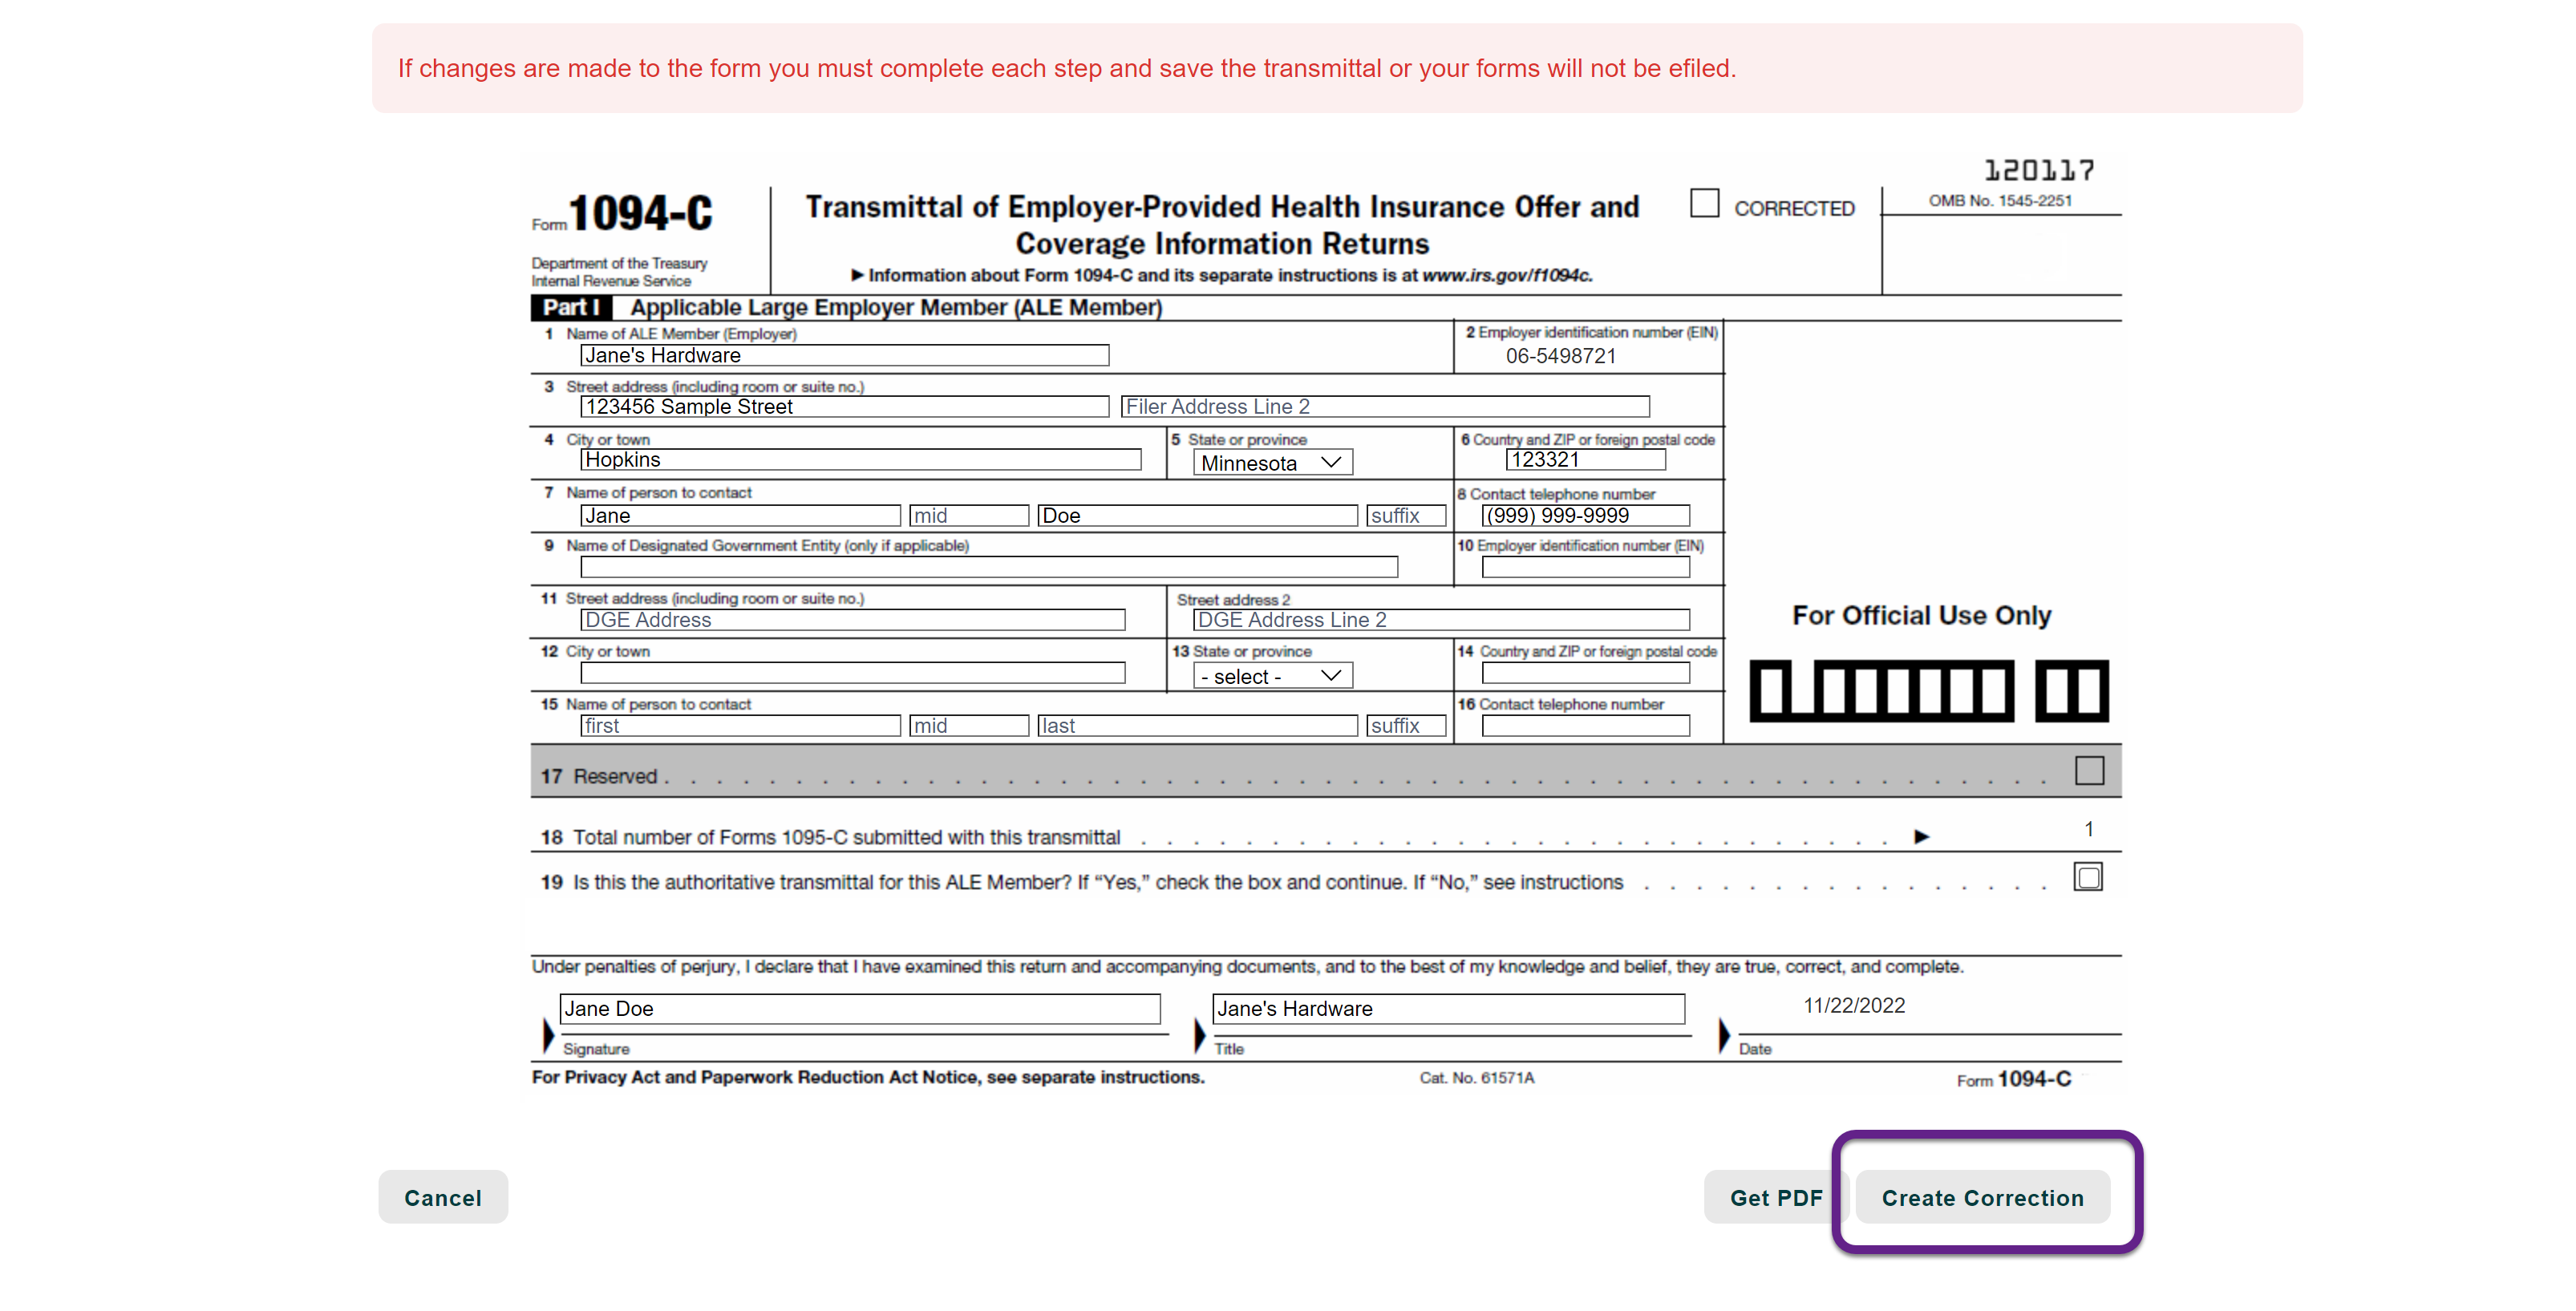 Image of a 1094-C form with a callout on the Create Correction button.